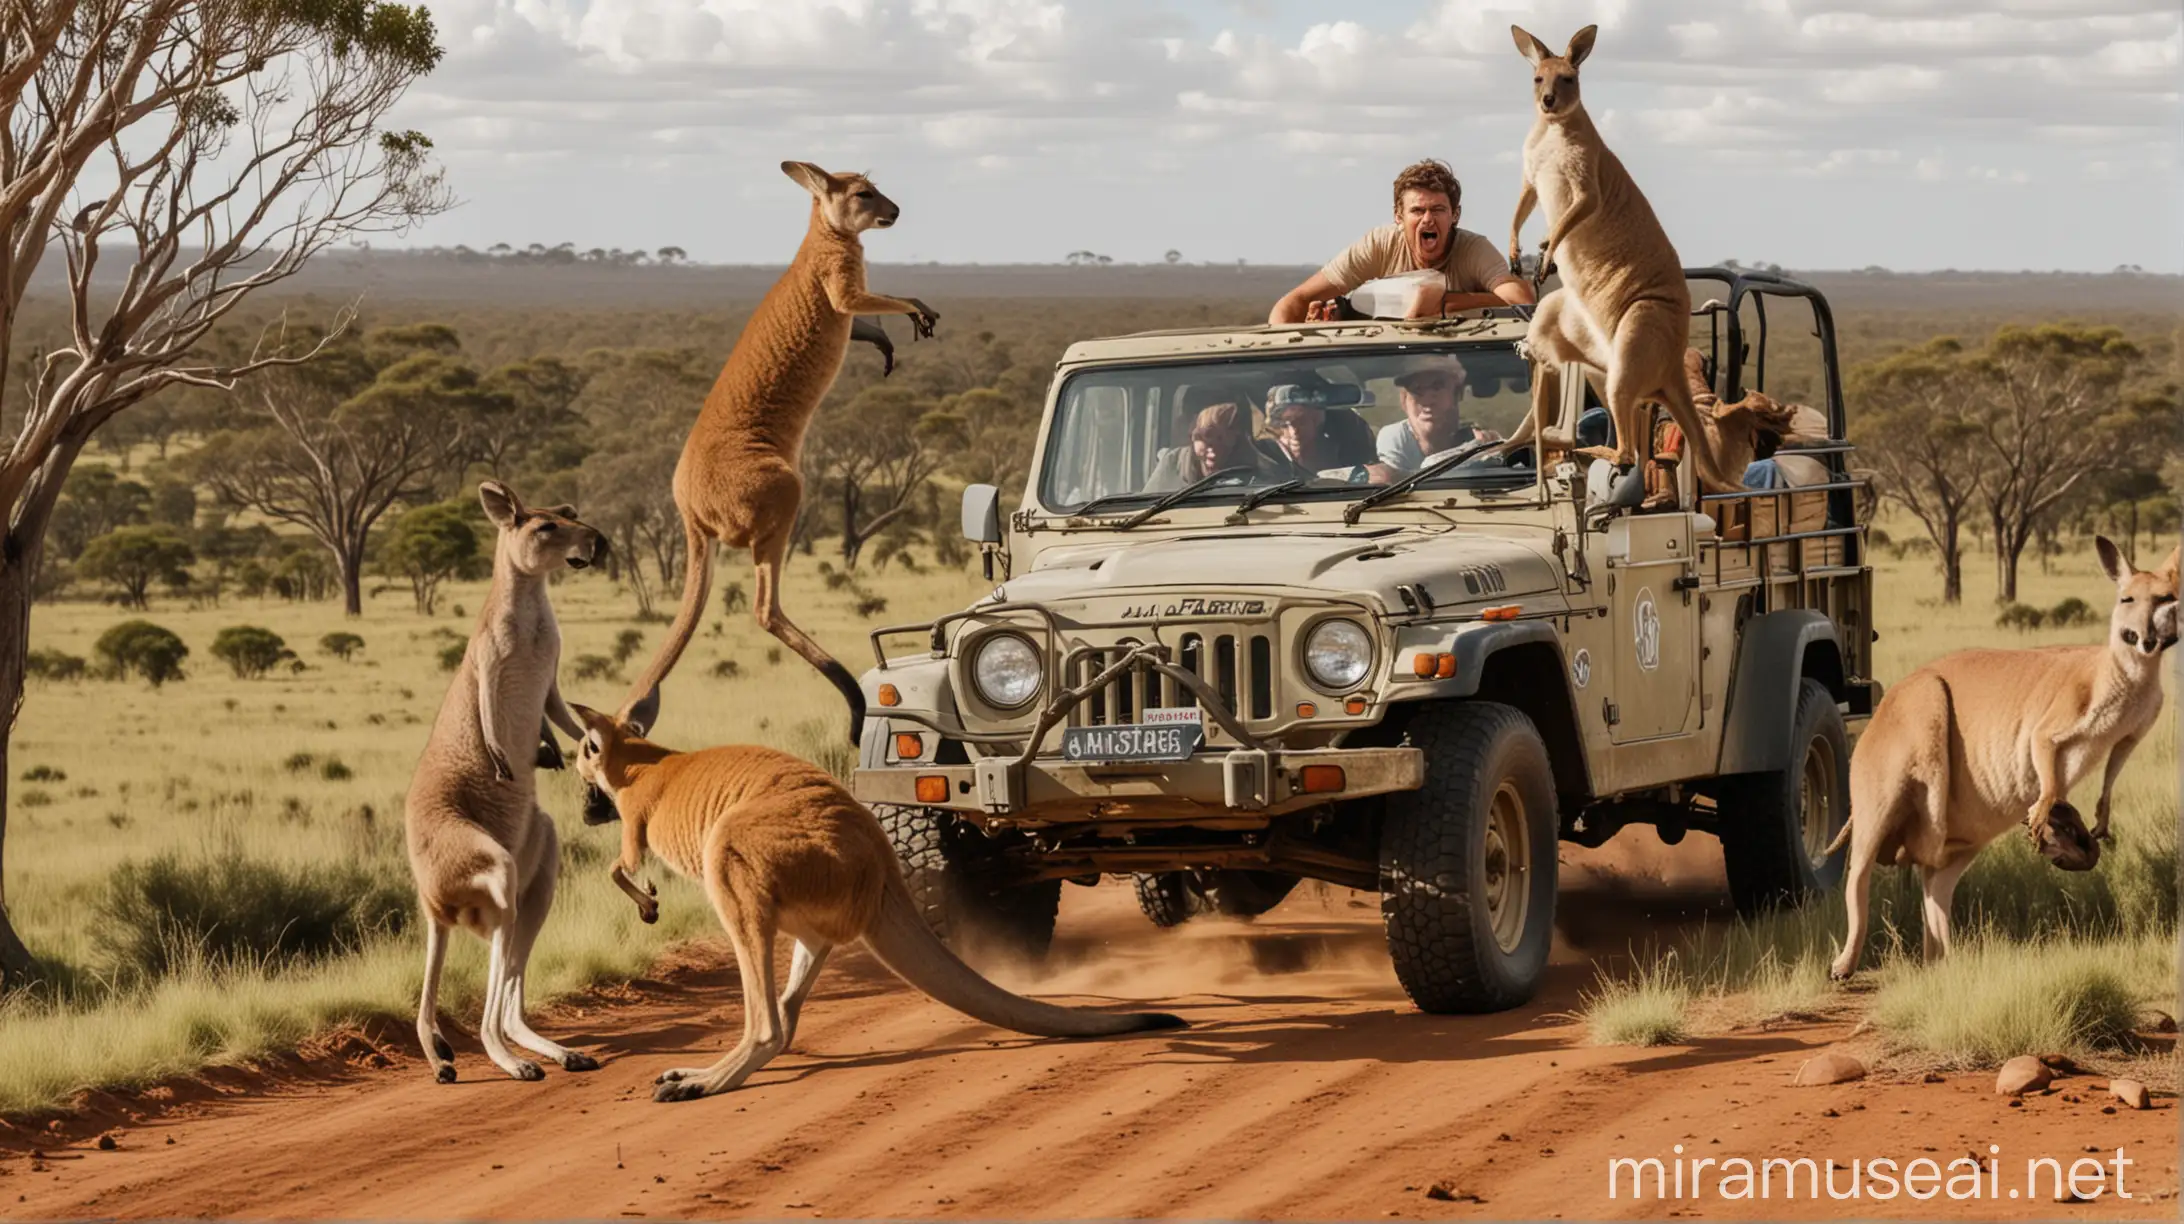 Animals like, Kangaroo and other Australian animals trying to Attack a couple sitting on a jeep,

"jeep in the middle of the photo front facing"